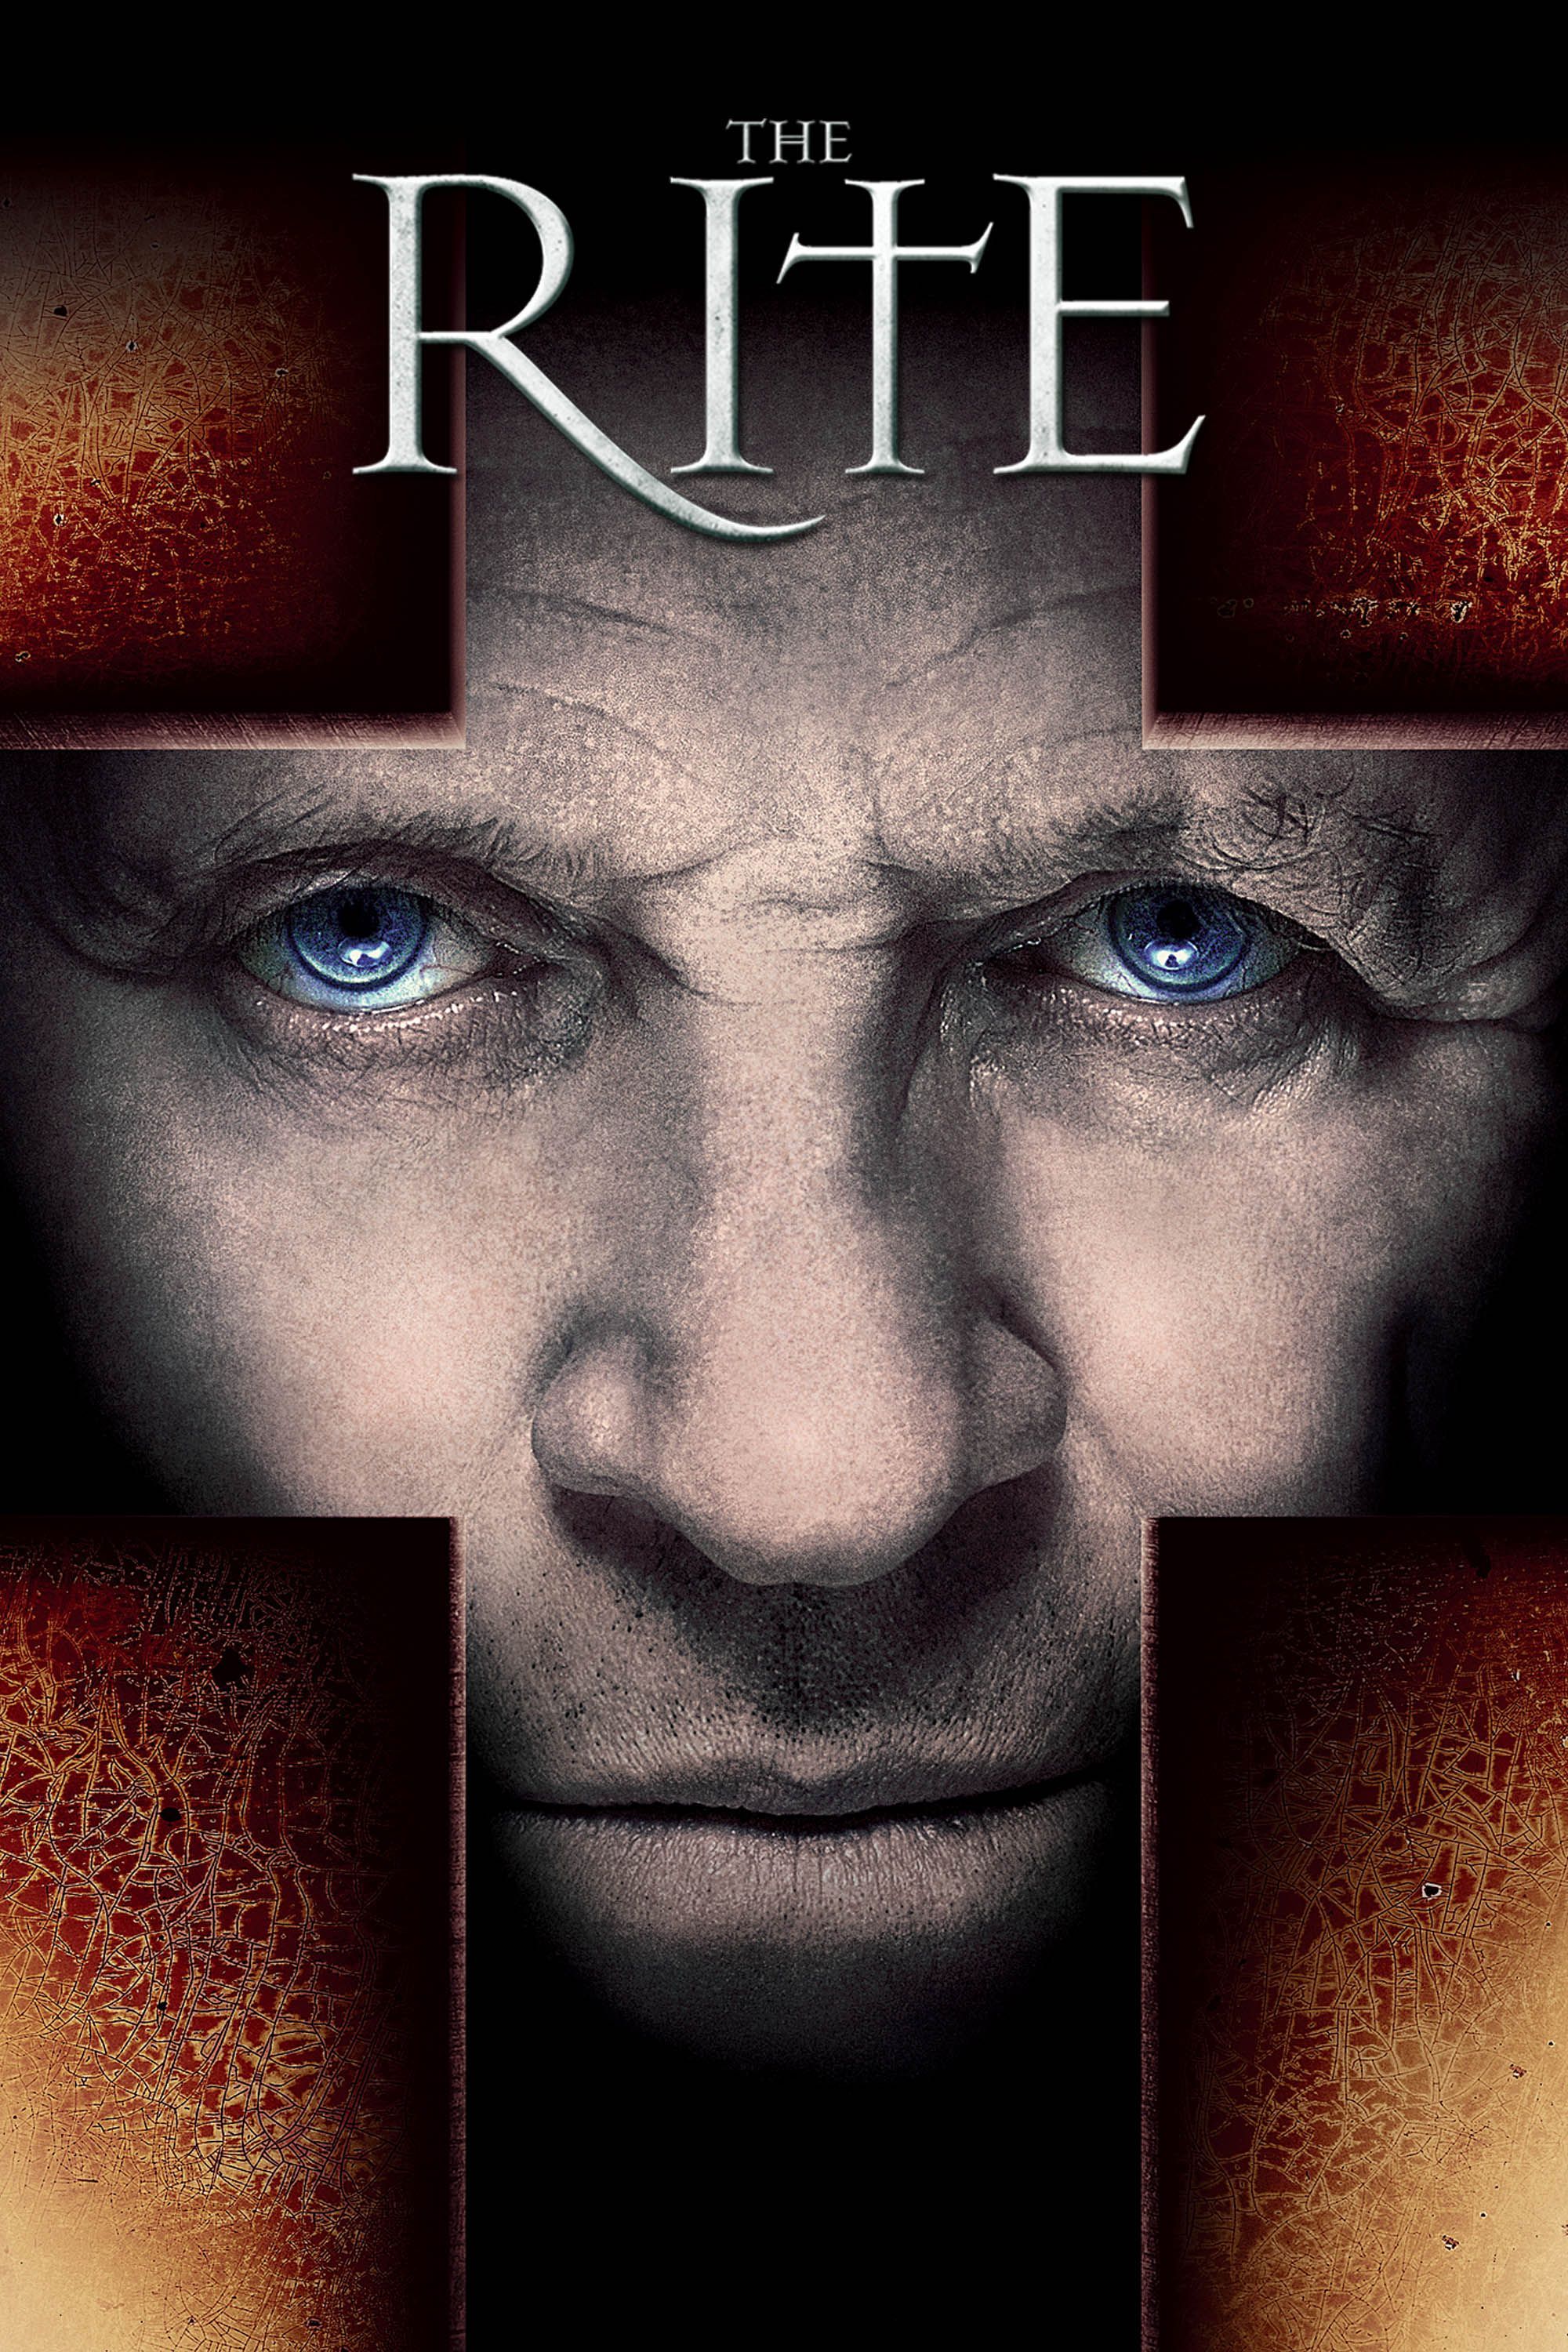 the rite poster